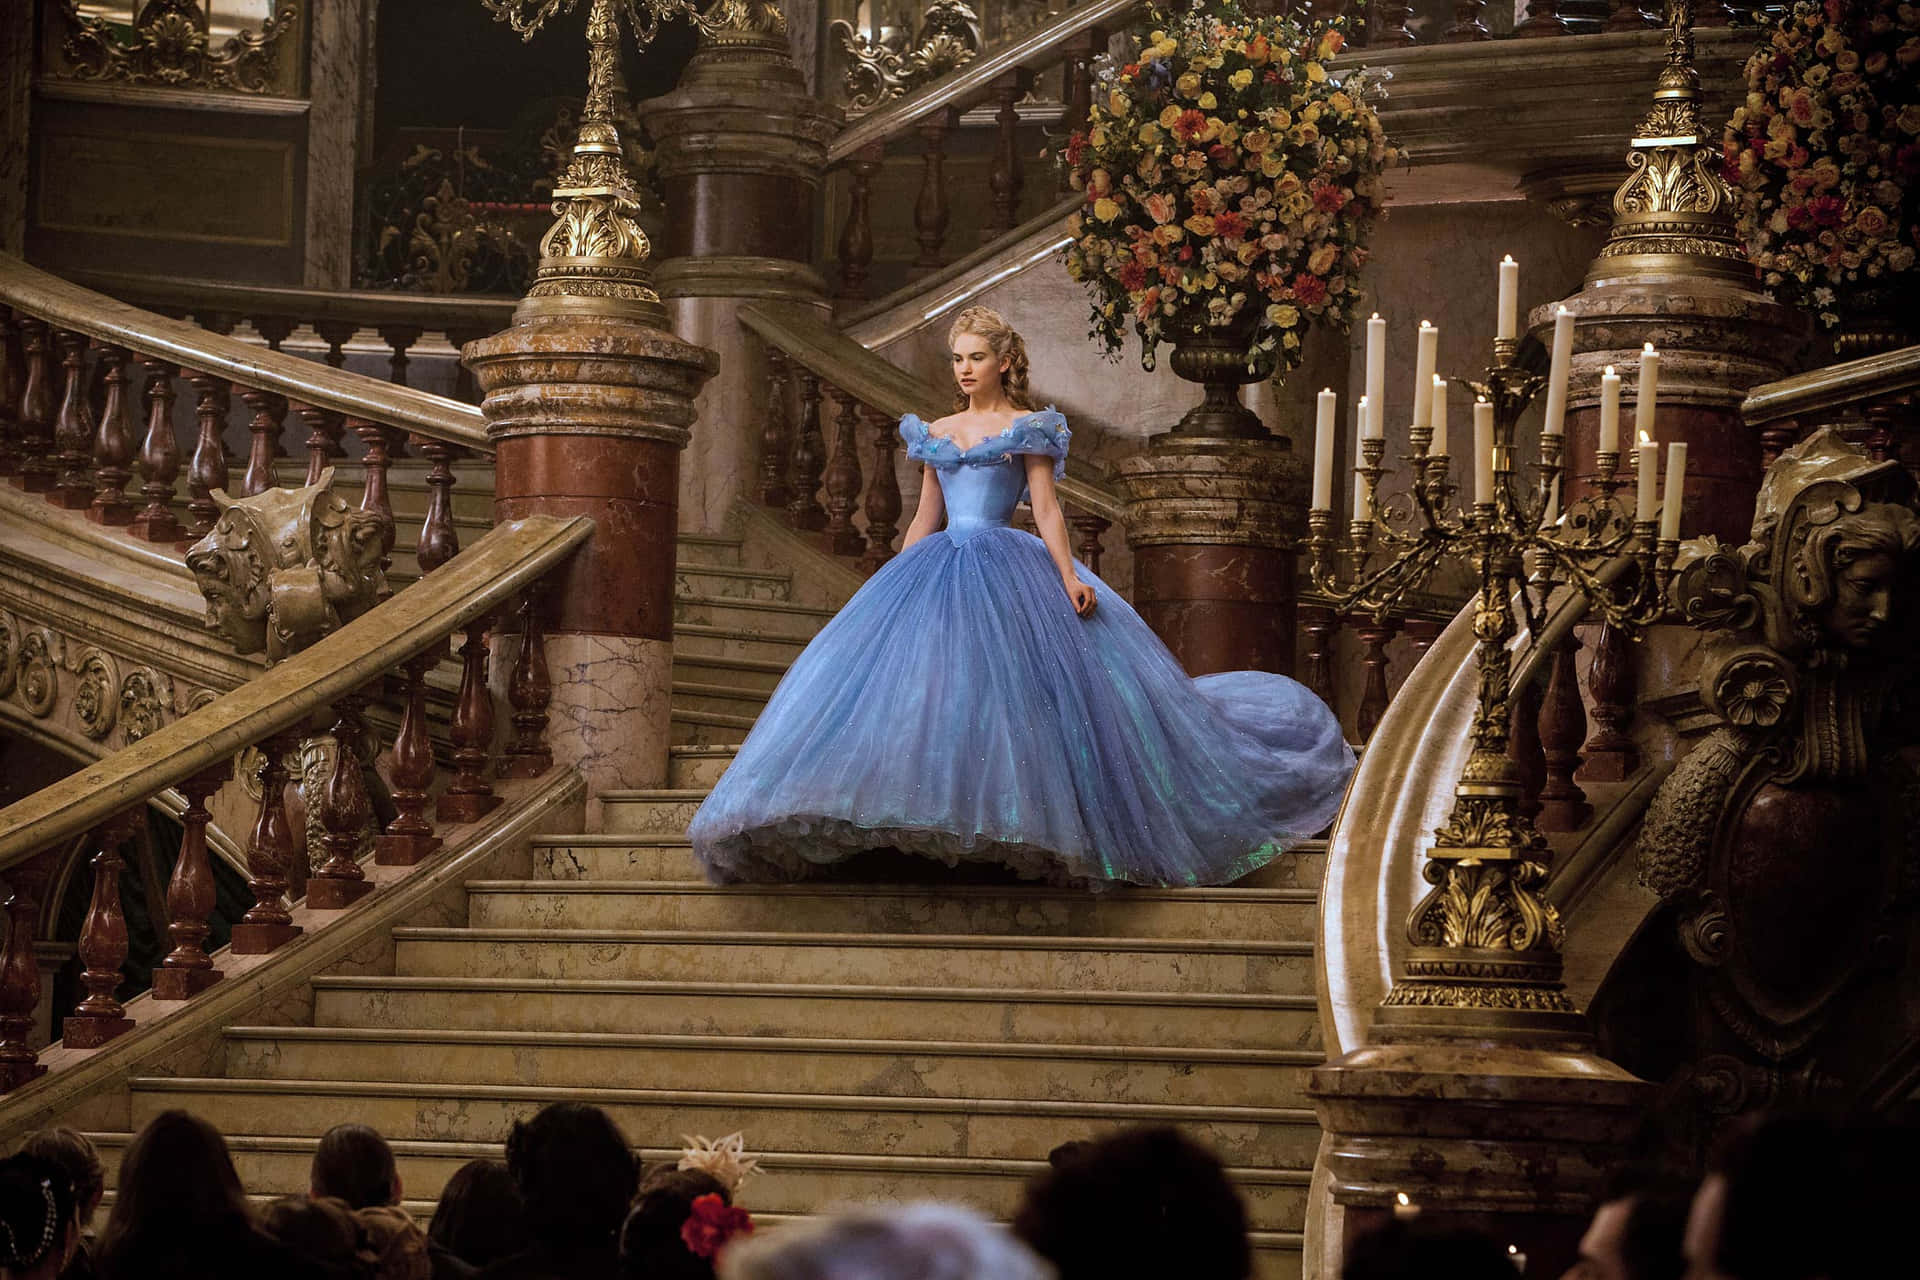 Cinderella is set to attend the ball in her magical transformation gown.